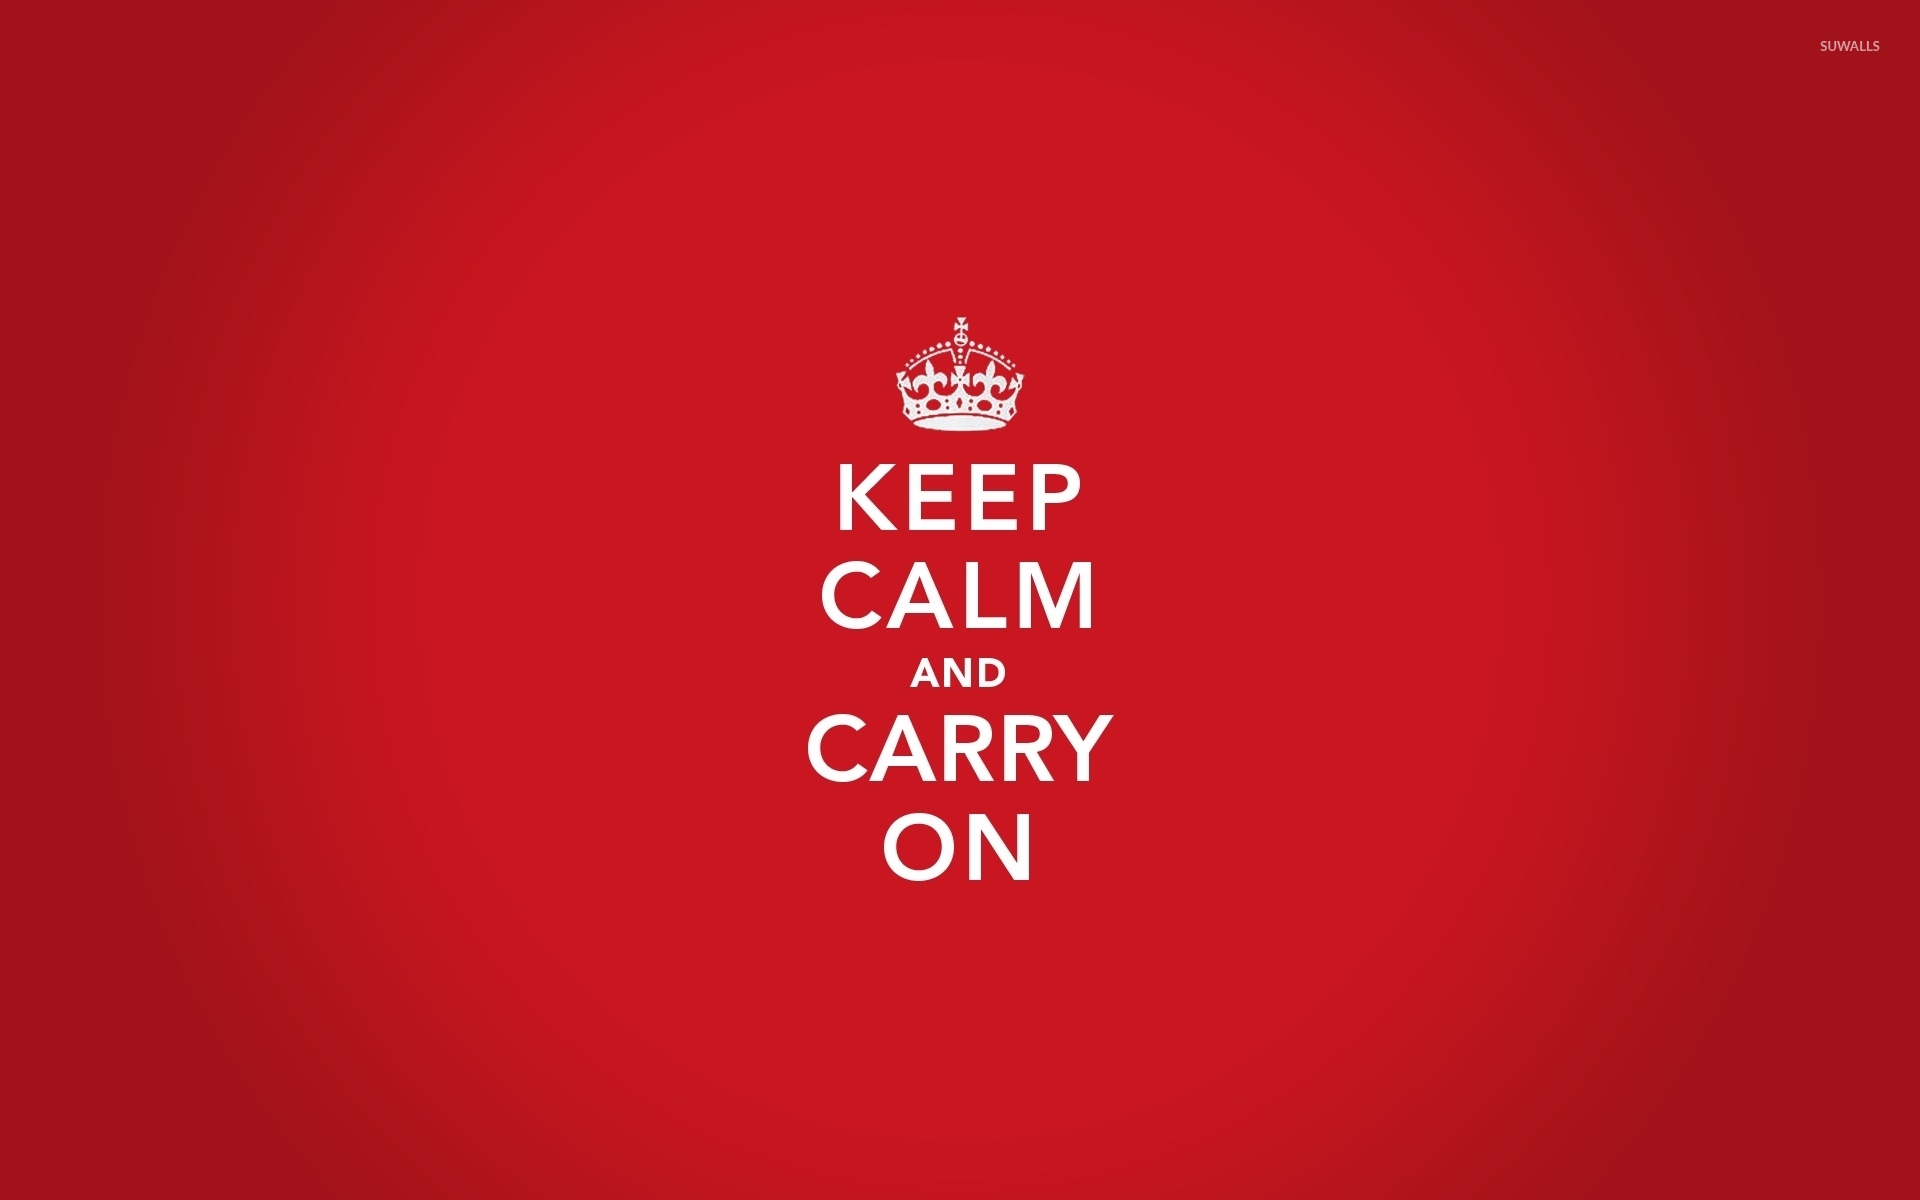 Keep calm and carry on wallpaper - Quote wallpapers - #43610